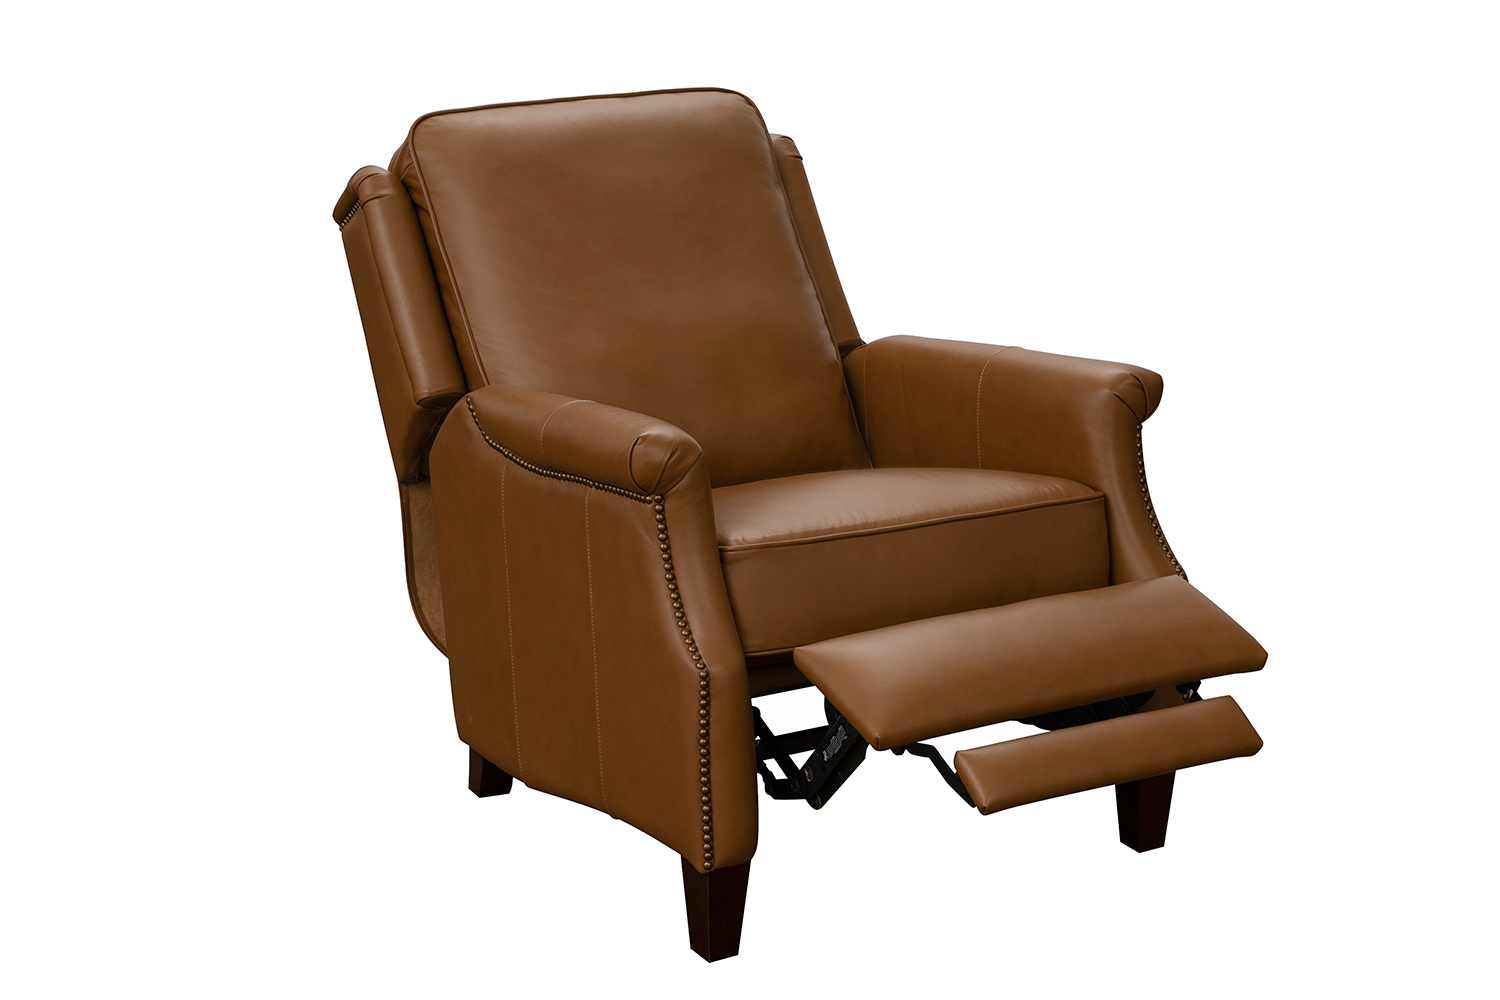 Barcalounger Riley Recliner Chair - Shoreham Ponytail/All Leather